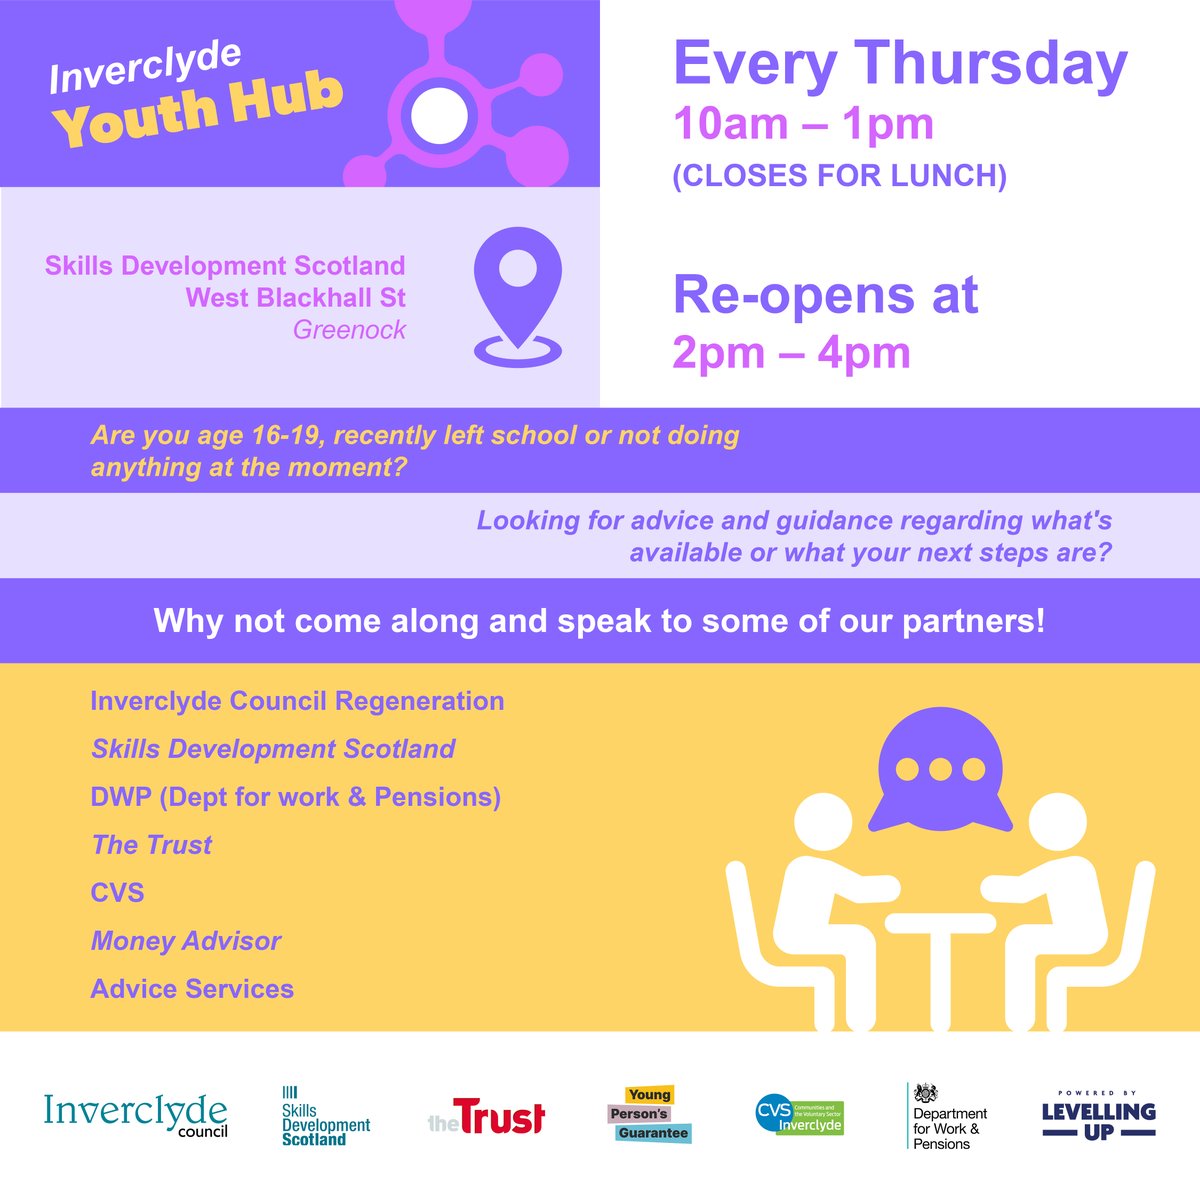 Today marks the start of Scottish Careers Week, so its the perfect time to visit the Youth Hub. Coordinated by Inverclyde Council, its open on Thursdays for advice, support and information about jobs, training and opportunities for 16-19 years olds.